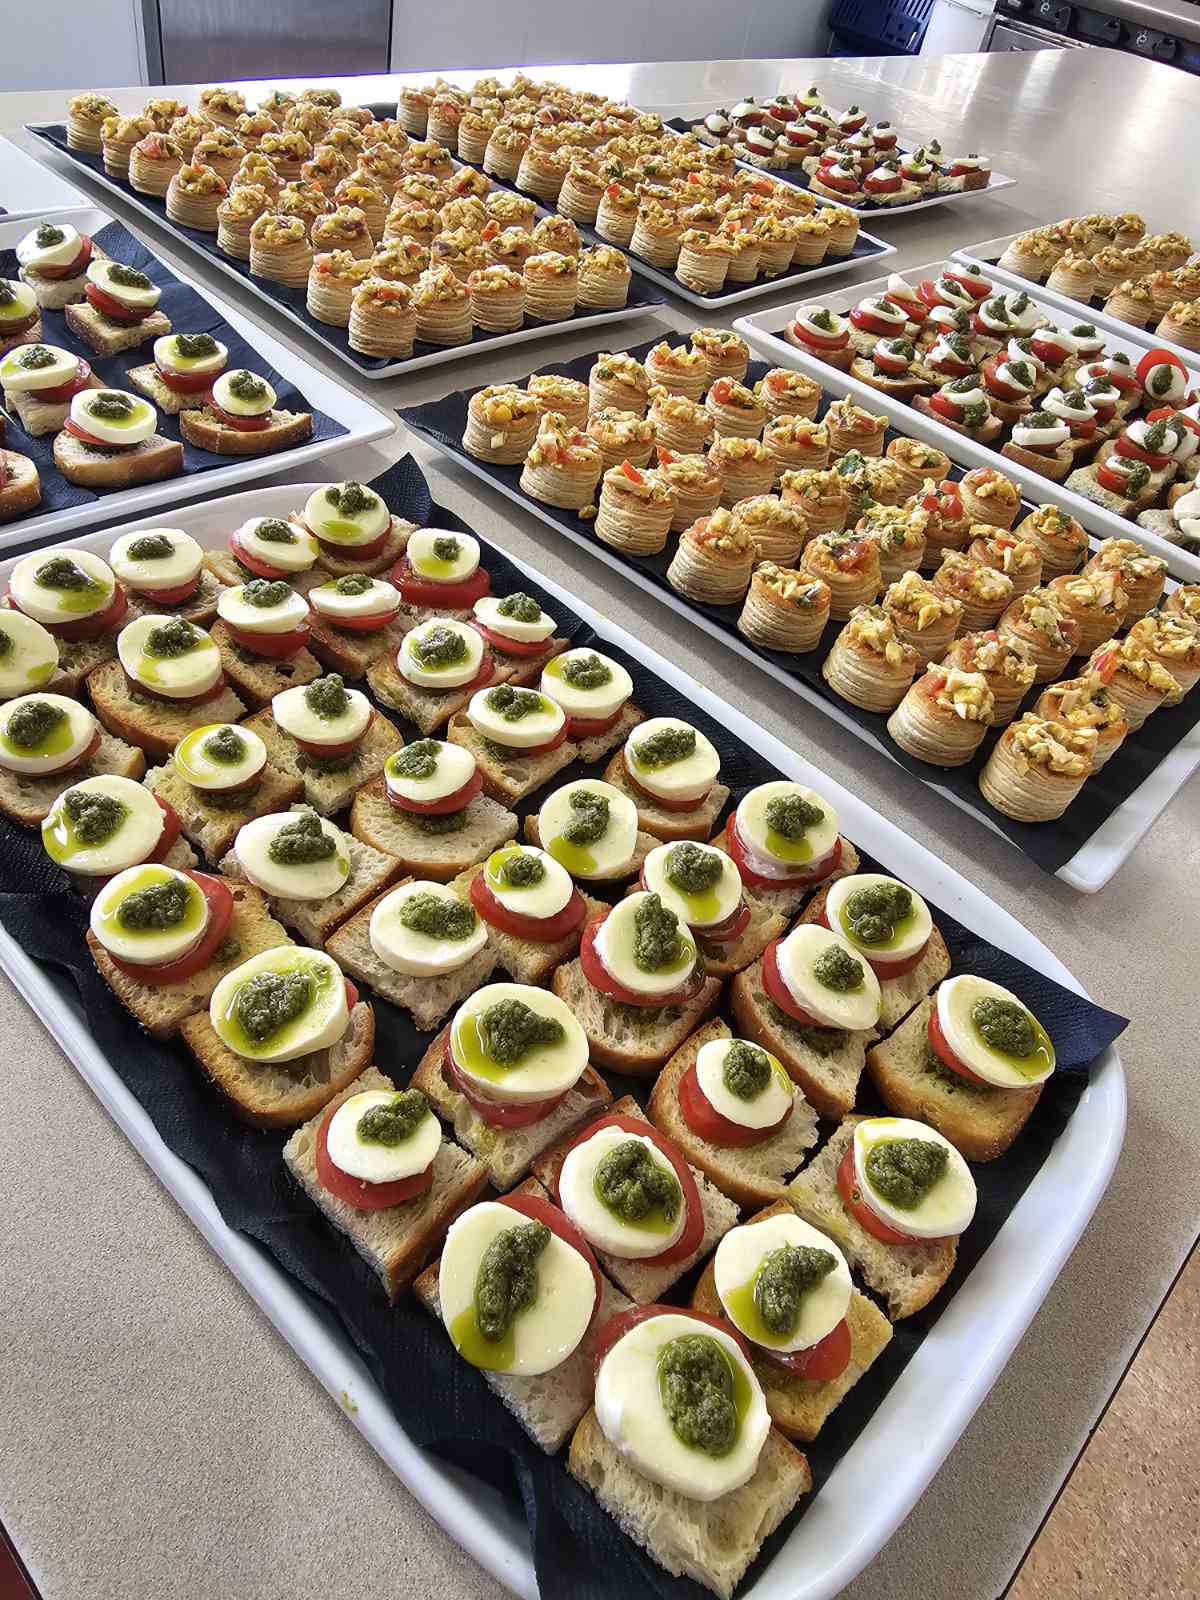 Catering service in Warkworth, Auckland, New Zealand.